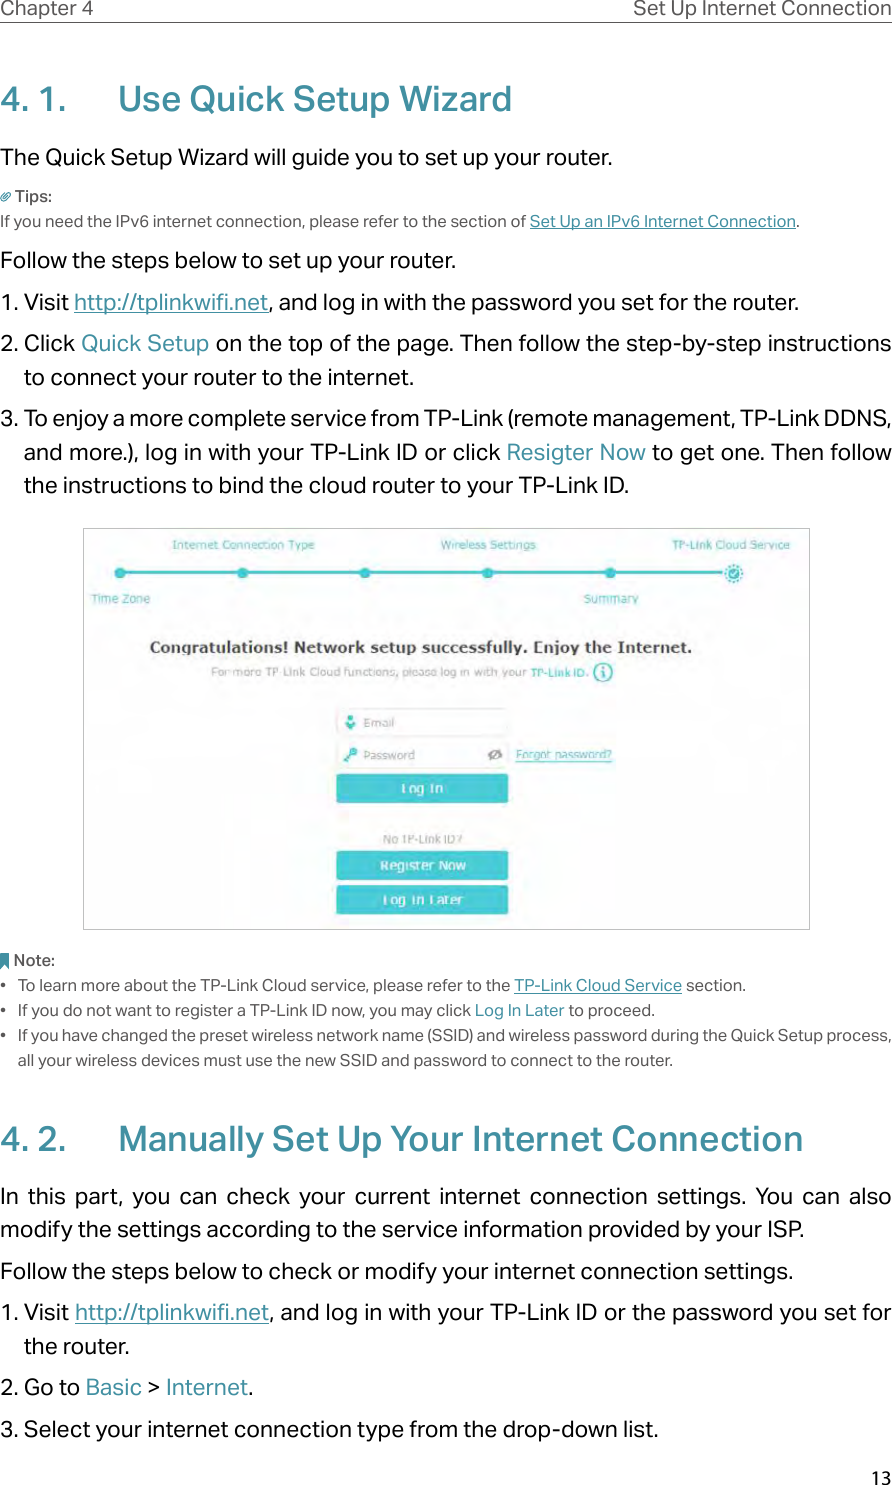 13Chapter 4 Set Up Internet Connection4. 1.  Use Quick Setup WizardThe Quick Setup Wizard will guide you to set up your router.Tips:If you need the IPv6 internet connection, please refer to the section of Set Up an IPv6 Internet Connection.Follow the steps below to set up your router.1. Visit http://tplinkwifi.net, and log in with the password you set for the router.2. Click Quick Setup on the top of the page. Then follow the step-by-step instructions to connect your router to the internet.3. To enjoy a more complete service from TP-Link (remote management, TP-Link DDNS, and more.), log in with your TP-Link ID or click Resigter Now to get one. Then follow the instructions to bind the cloud router to your TP-Link ID.Note:•  To learn more about the TP-Link Cloud service, please refer to the TP-Link Cloud Service section.•  If you do not want to register a TP-Link ID now, you may click Log In Later to proceed.•  If you have changed the preset wireless network name (SSID) and wireless password during the Quick Setup process, all your wireless devices must use the new SSID and password to connect to the router.4. 2.  Manually Set Up Your Internet Connection In this part, you can check your current internet connection settings. You can also modify the settings according to the service information provided by your ISP.Follow the steps below to check or modify your internet connection settings.1. Visit http://tplinkwifi.net, and log in with your TP-Link ID or the password you set for the router.2. Go to Basic &gt; Internet.3. Select your internet connection type from the drop-down list. 